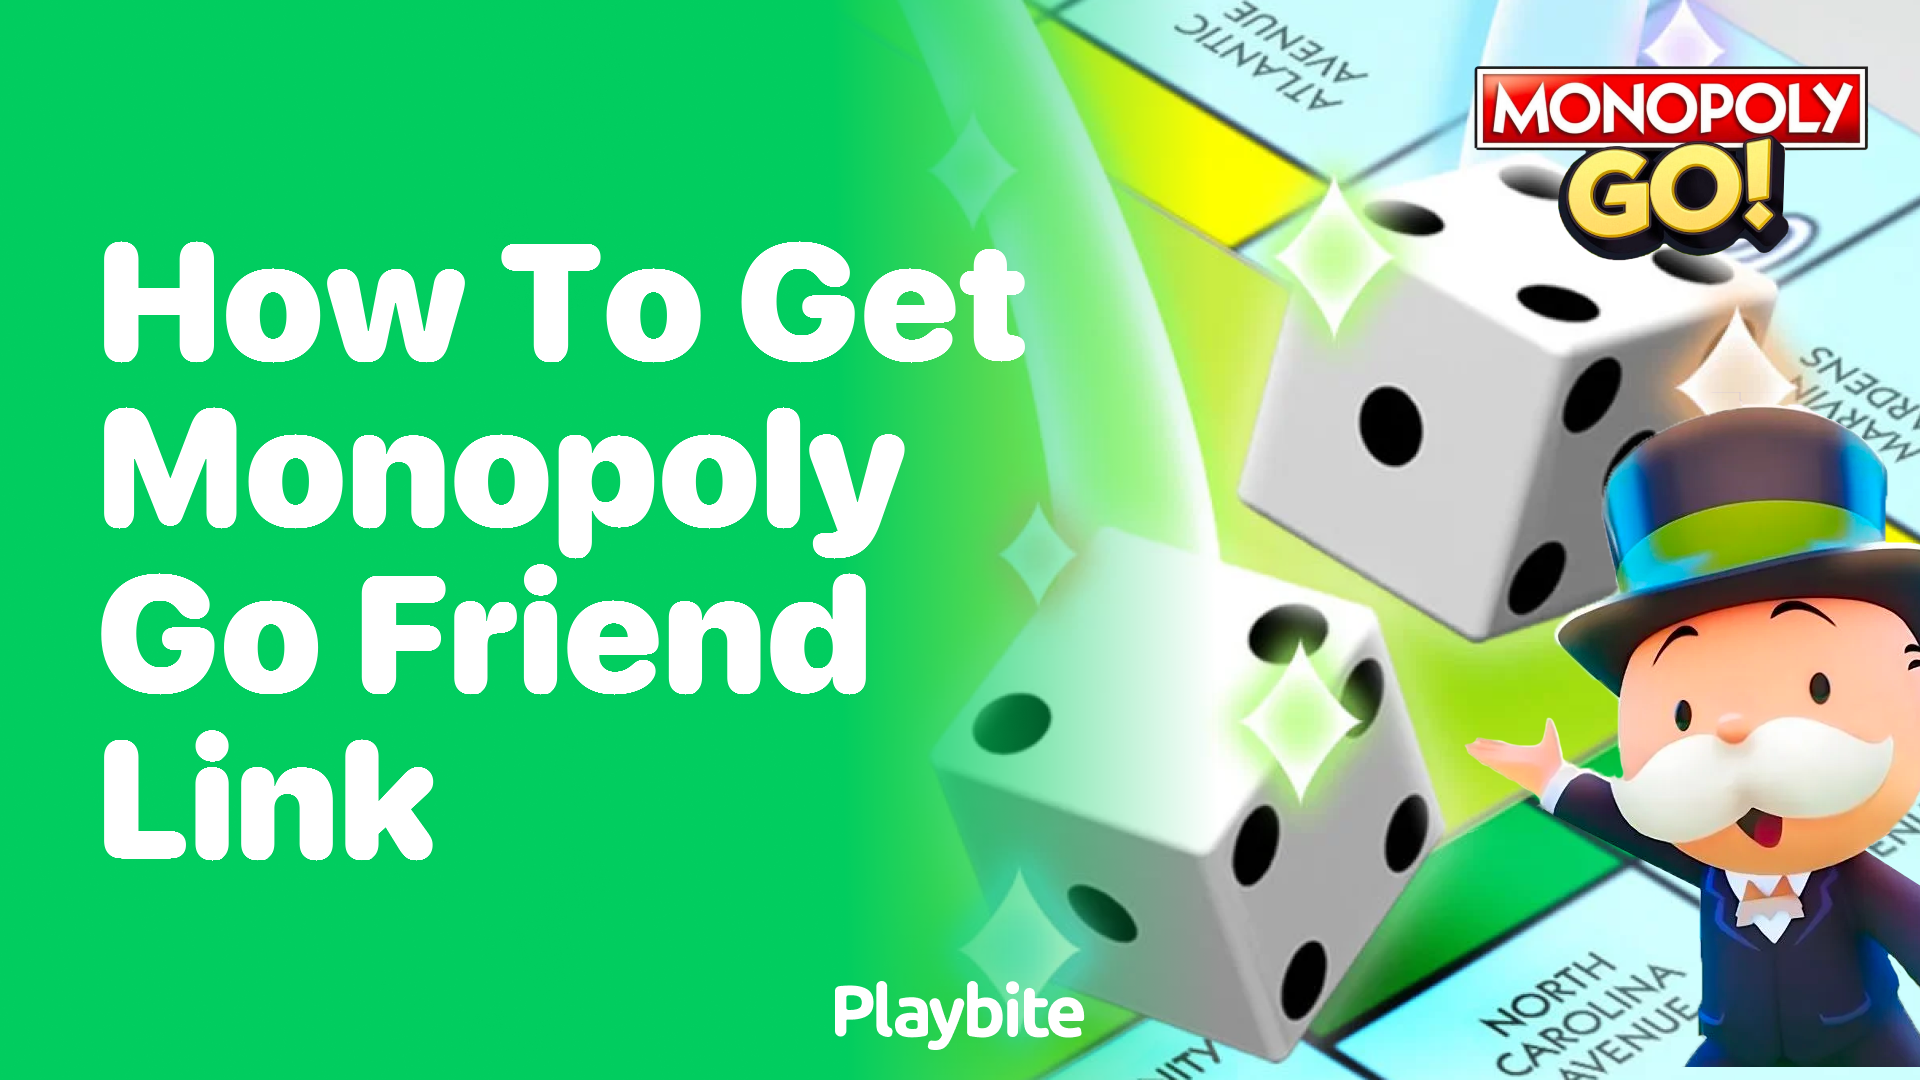 How to Get a Monopoly Go Friend Link?